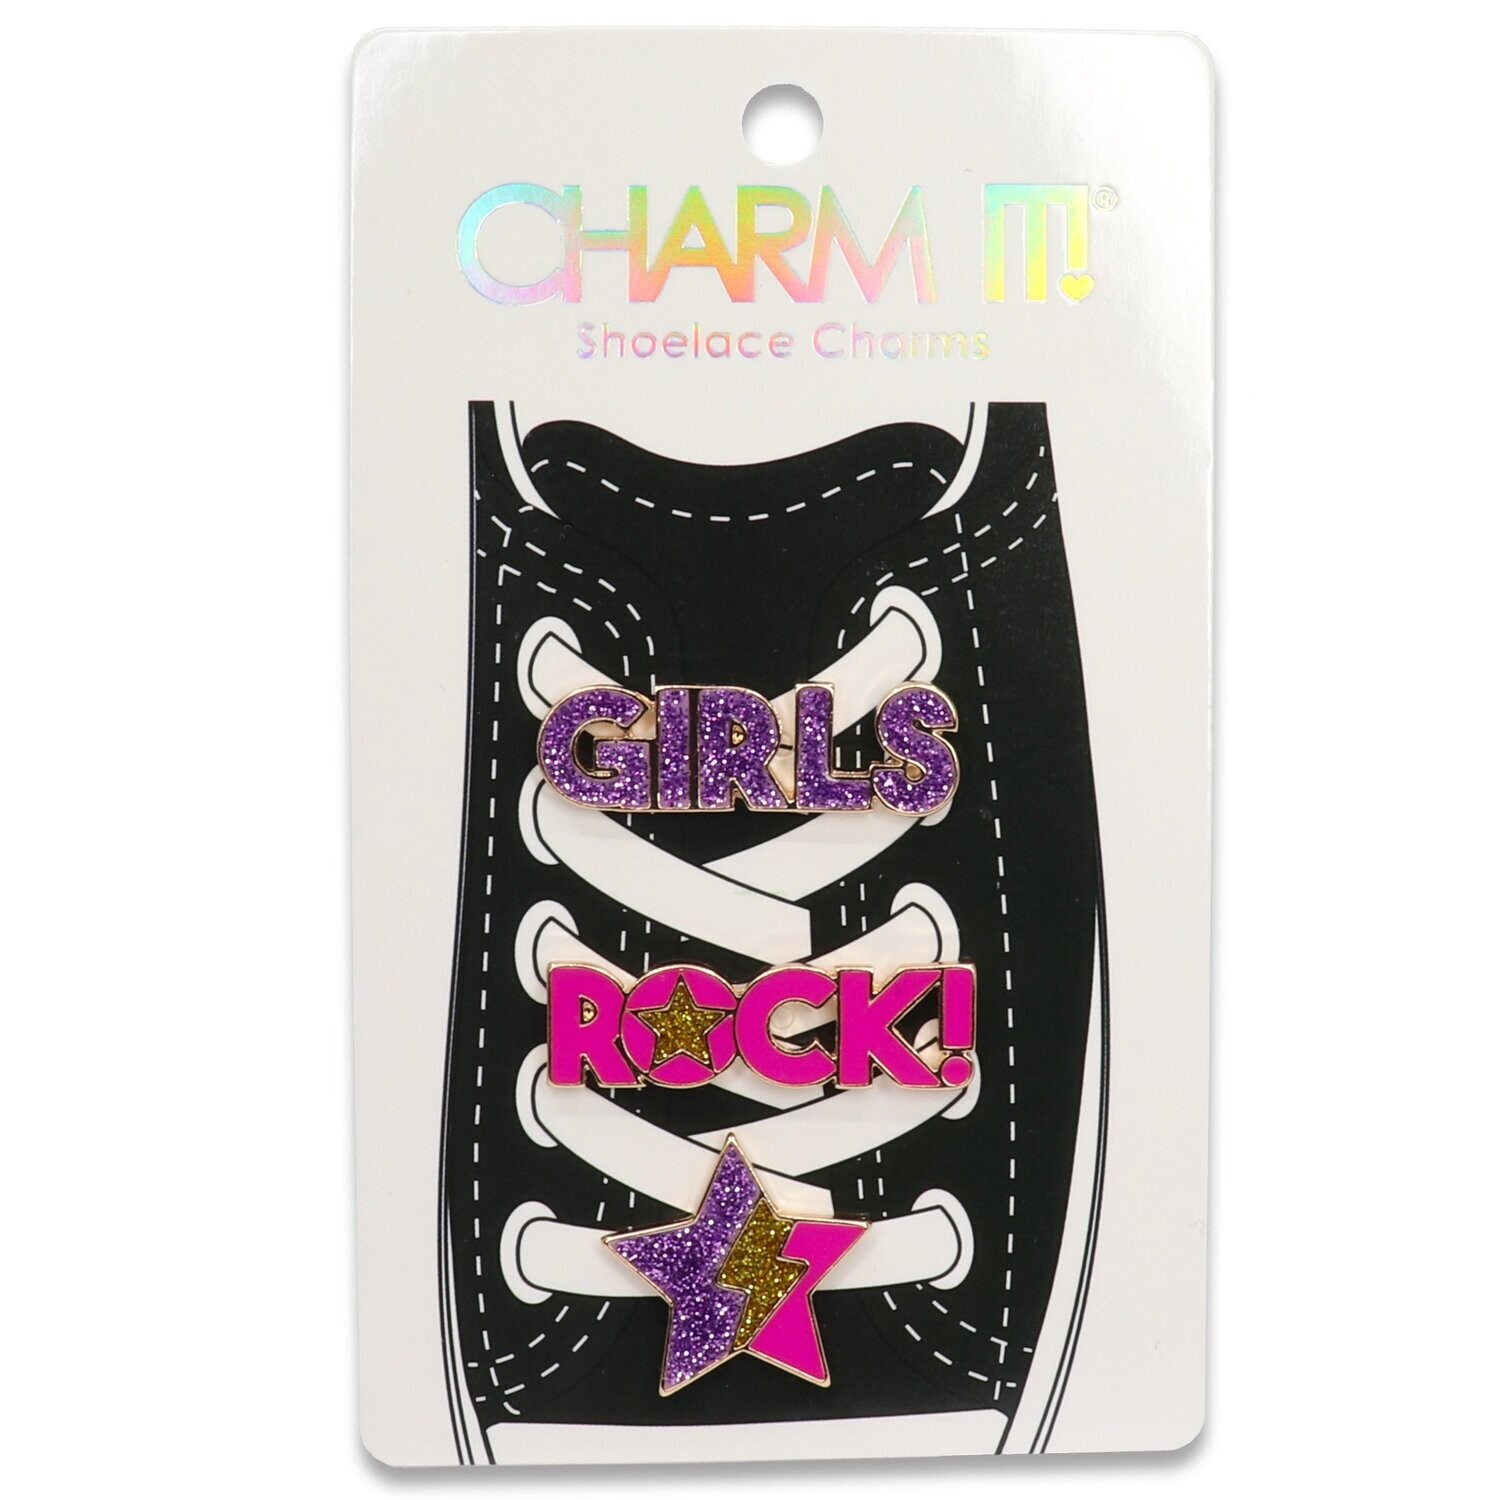 Charm it Shoelace Charms Girls Rock